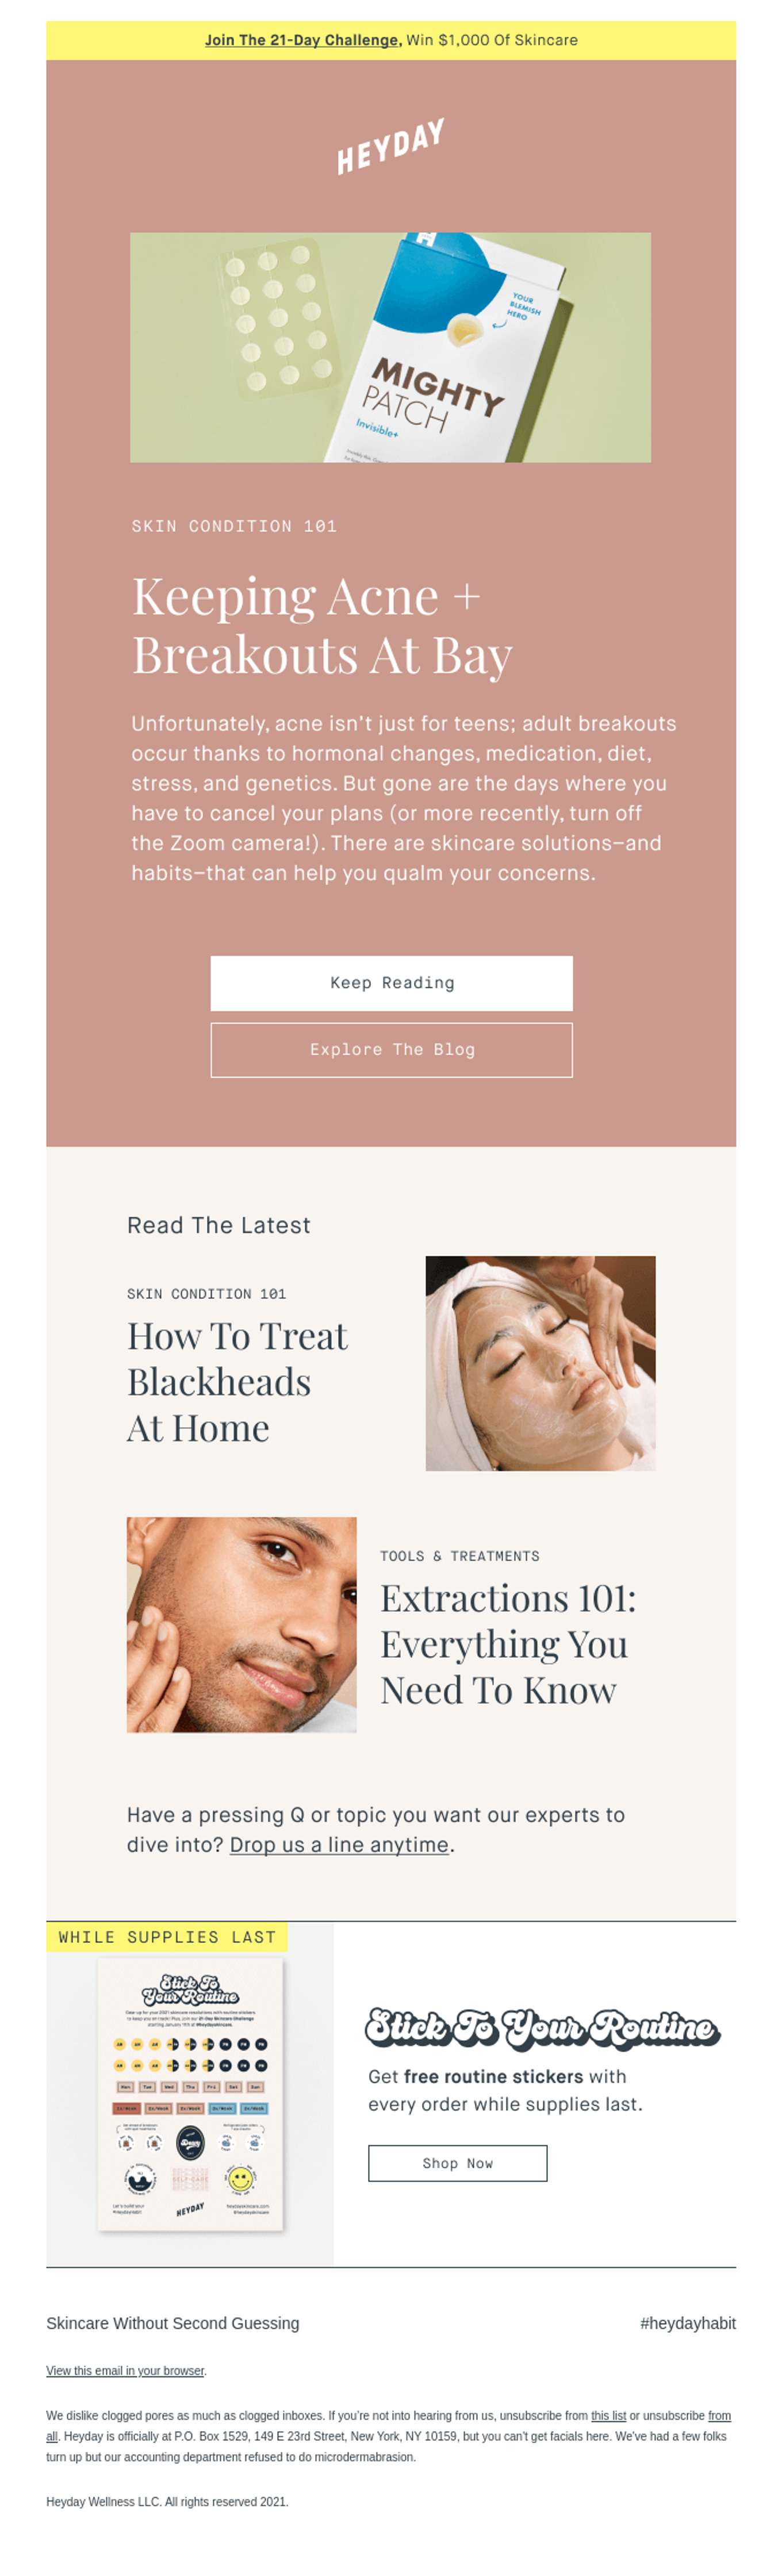 Subject: How our estheticians *actually* prevent and treat acne